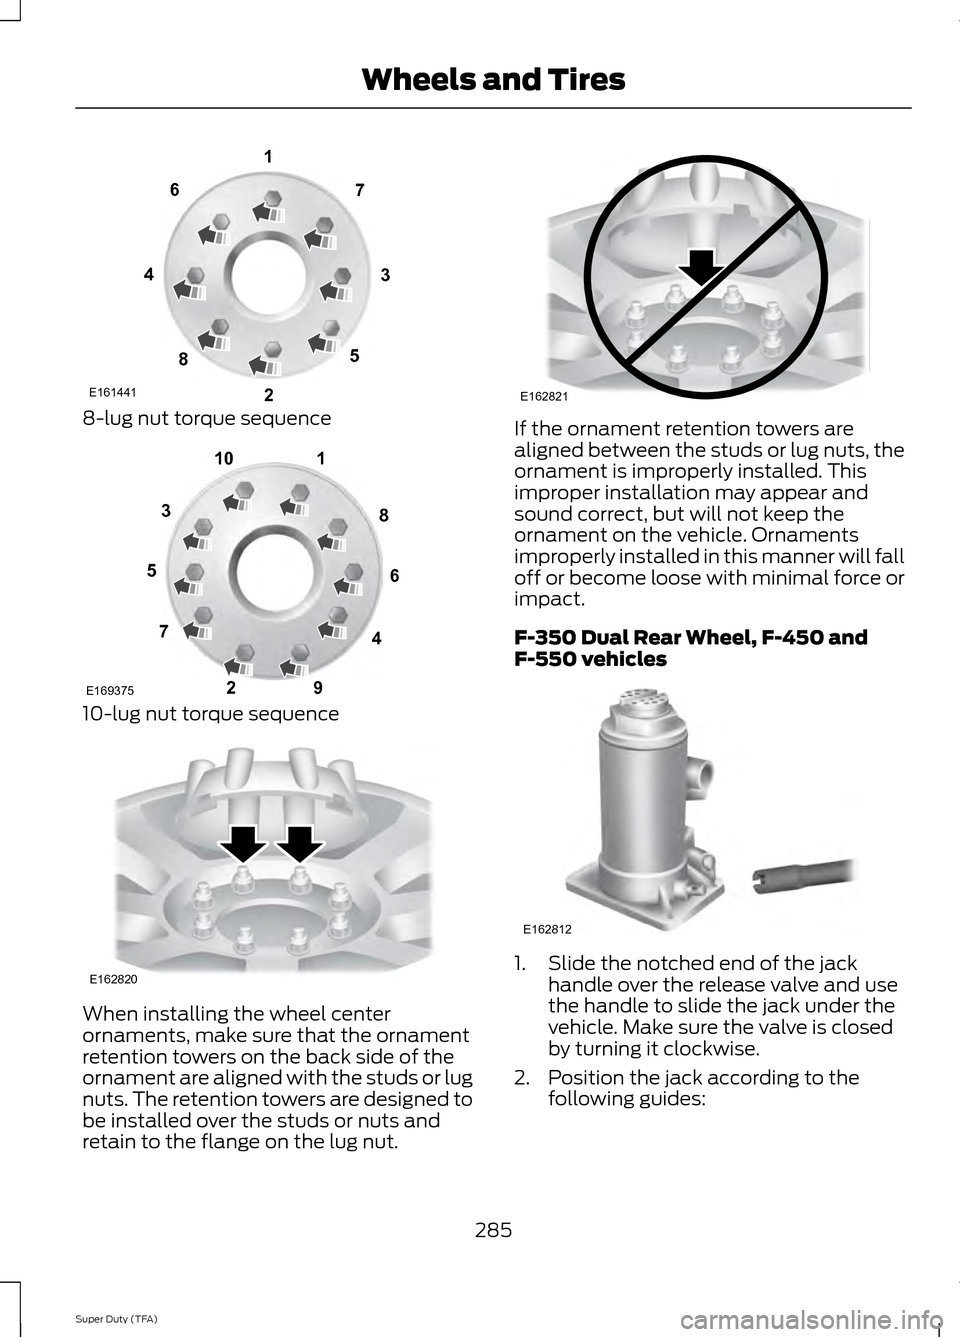 FORD SUPER DUTY 2014 3.G Owners Manual 8-lug nut torque sequence
10-lug nut torque sequence
When installing the wheel center
ornaments, make sure that the ornament
retention towers on the back side of the
ornament are aligned with the stud